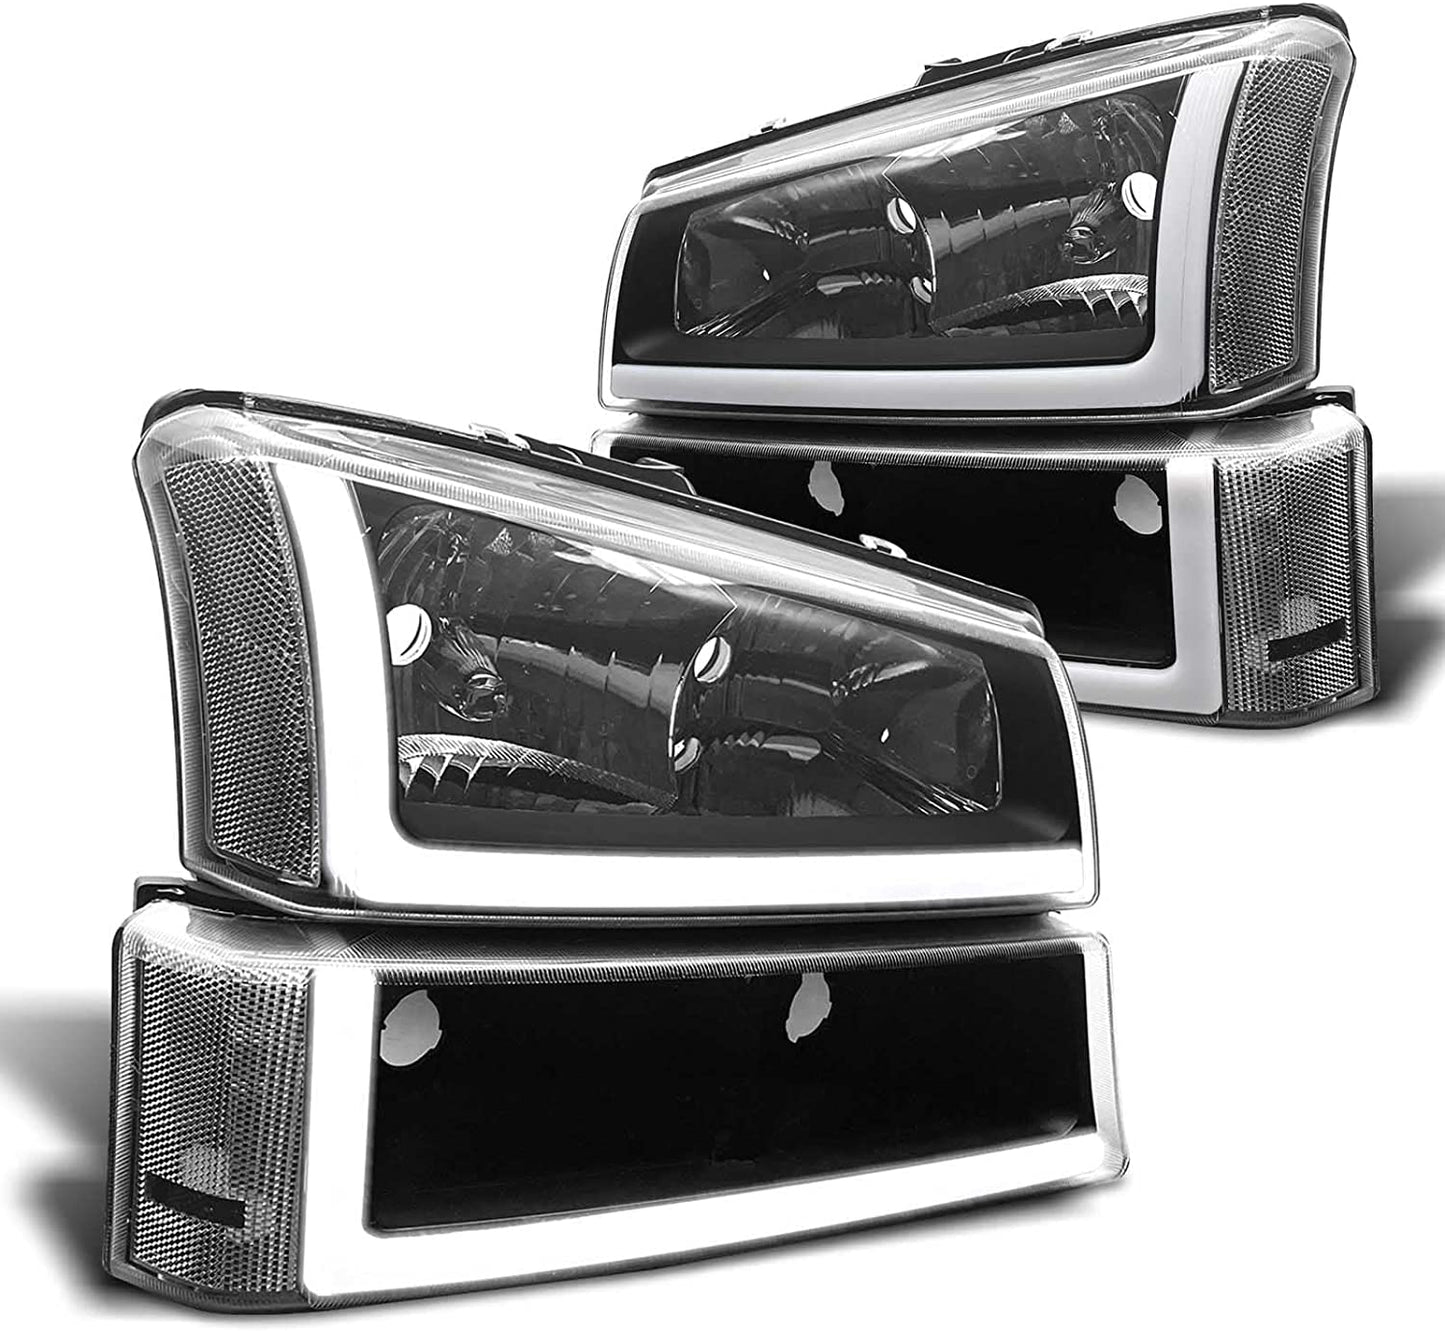 ADCARLIGHTS 2003-2006 Silverado Headlight Assembly for 2003-2006 Chevy Silverado Avalanche 1500/2500/3500 Clear Chrome Lens with Amber Reflector Replacement Left and Right